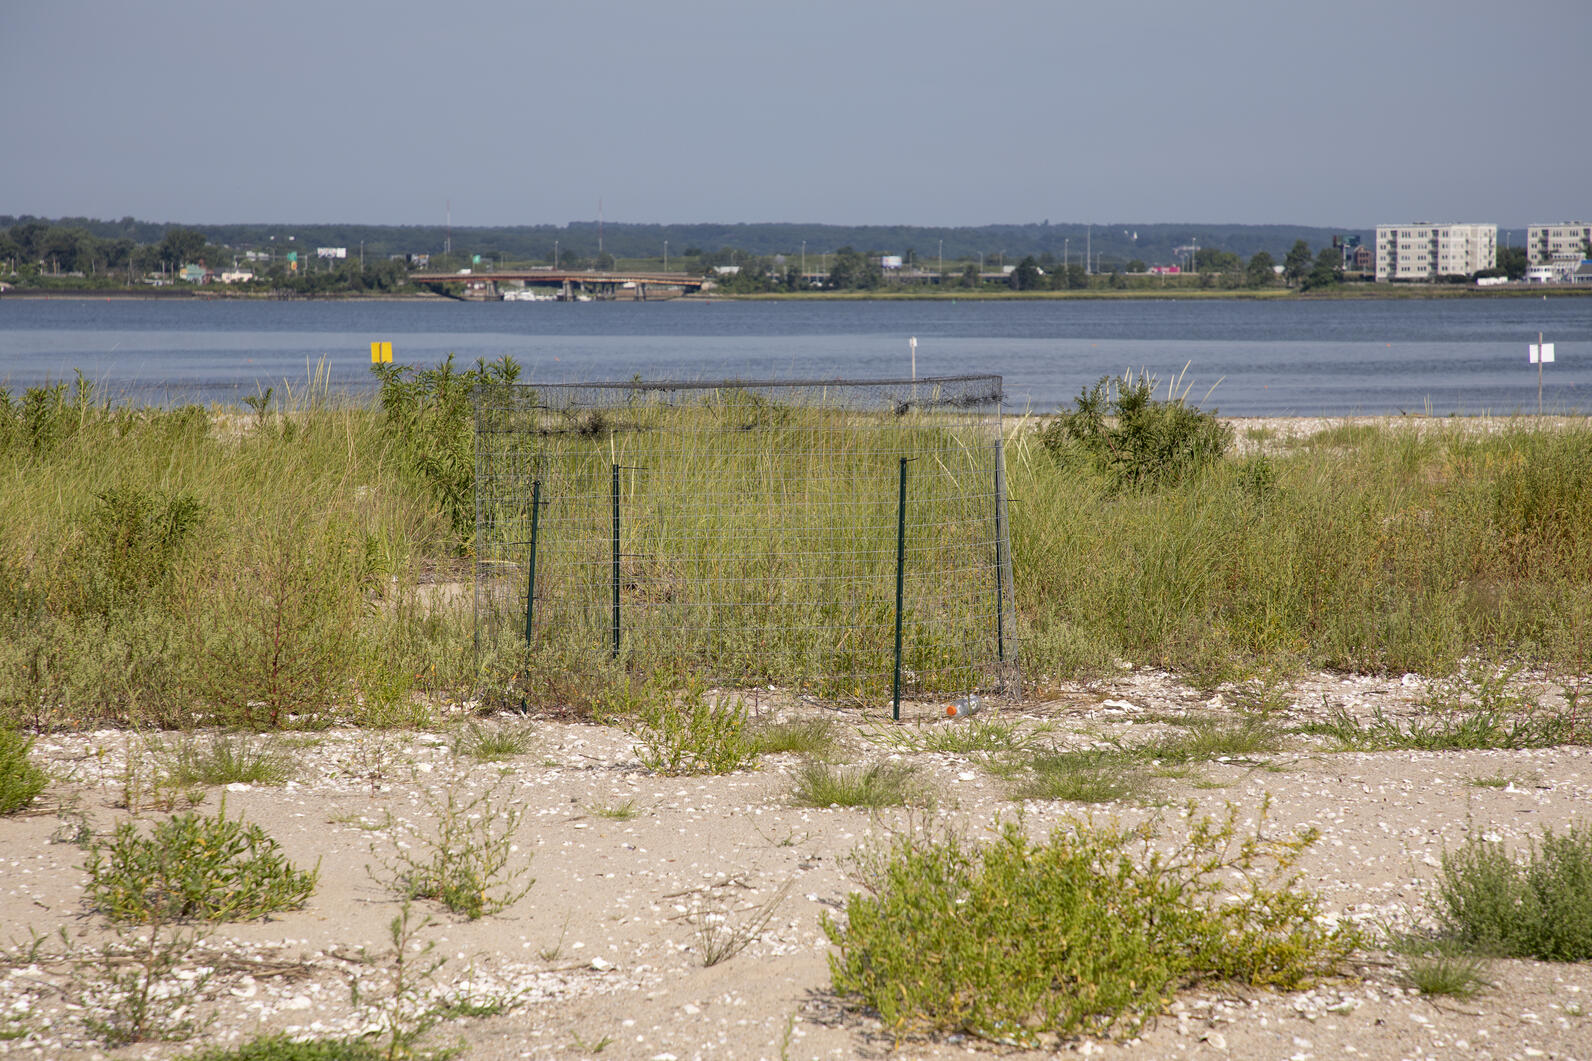 A round exclosure made of chicken wire standing on a grassy beach, with the ocean in the distance.